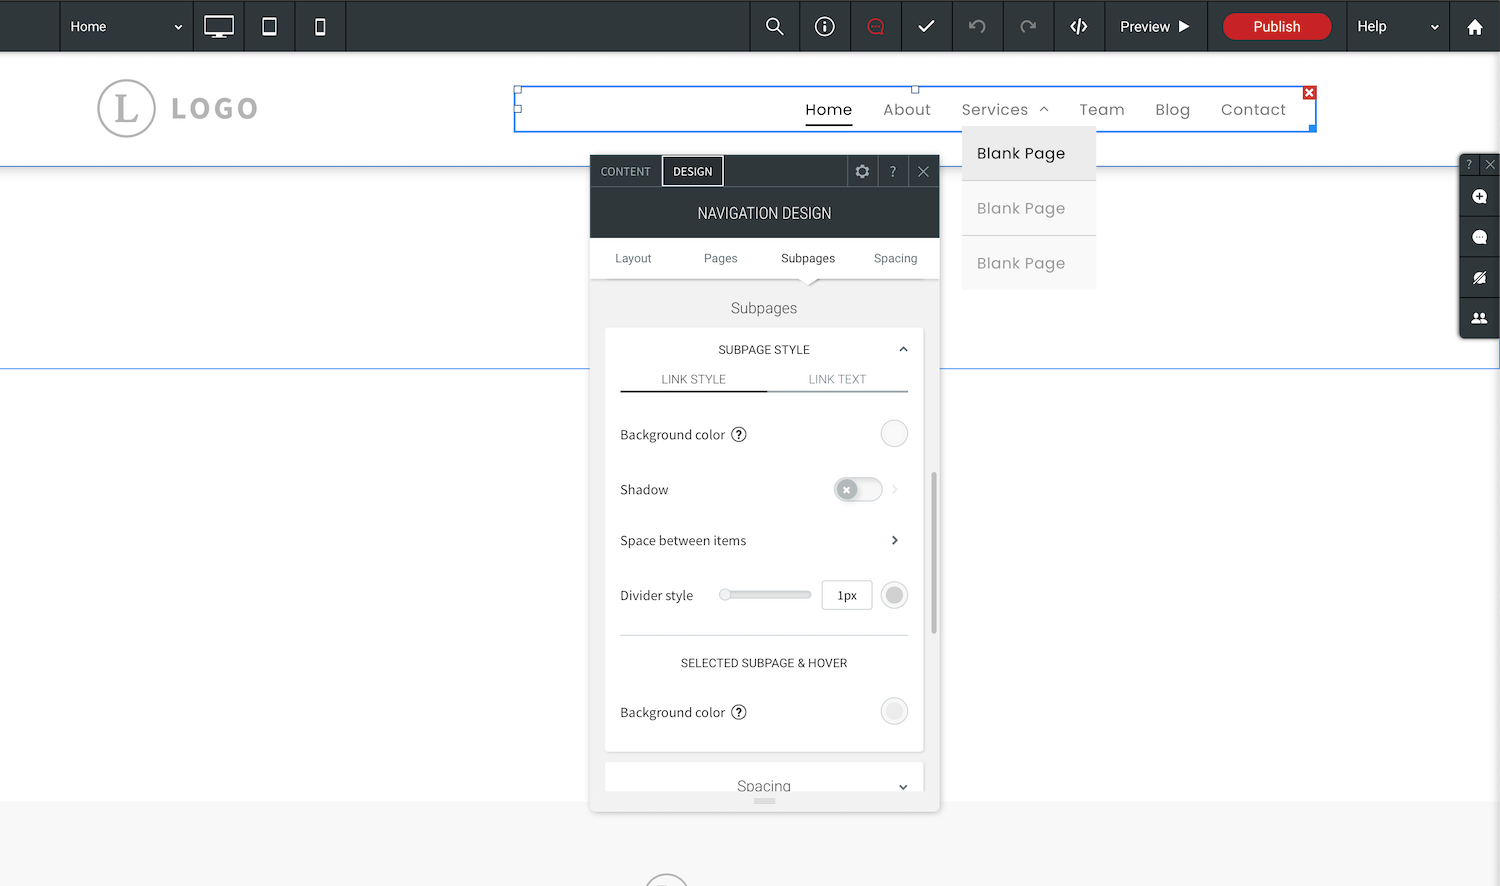 Design settings for subpages in Duda.